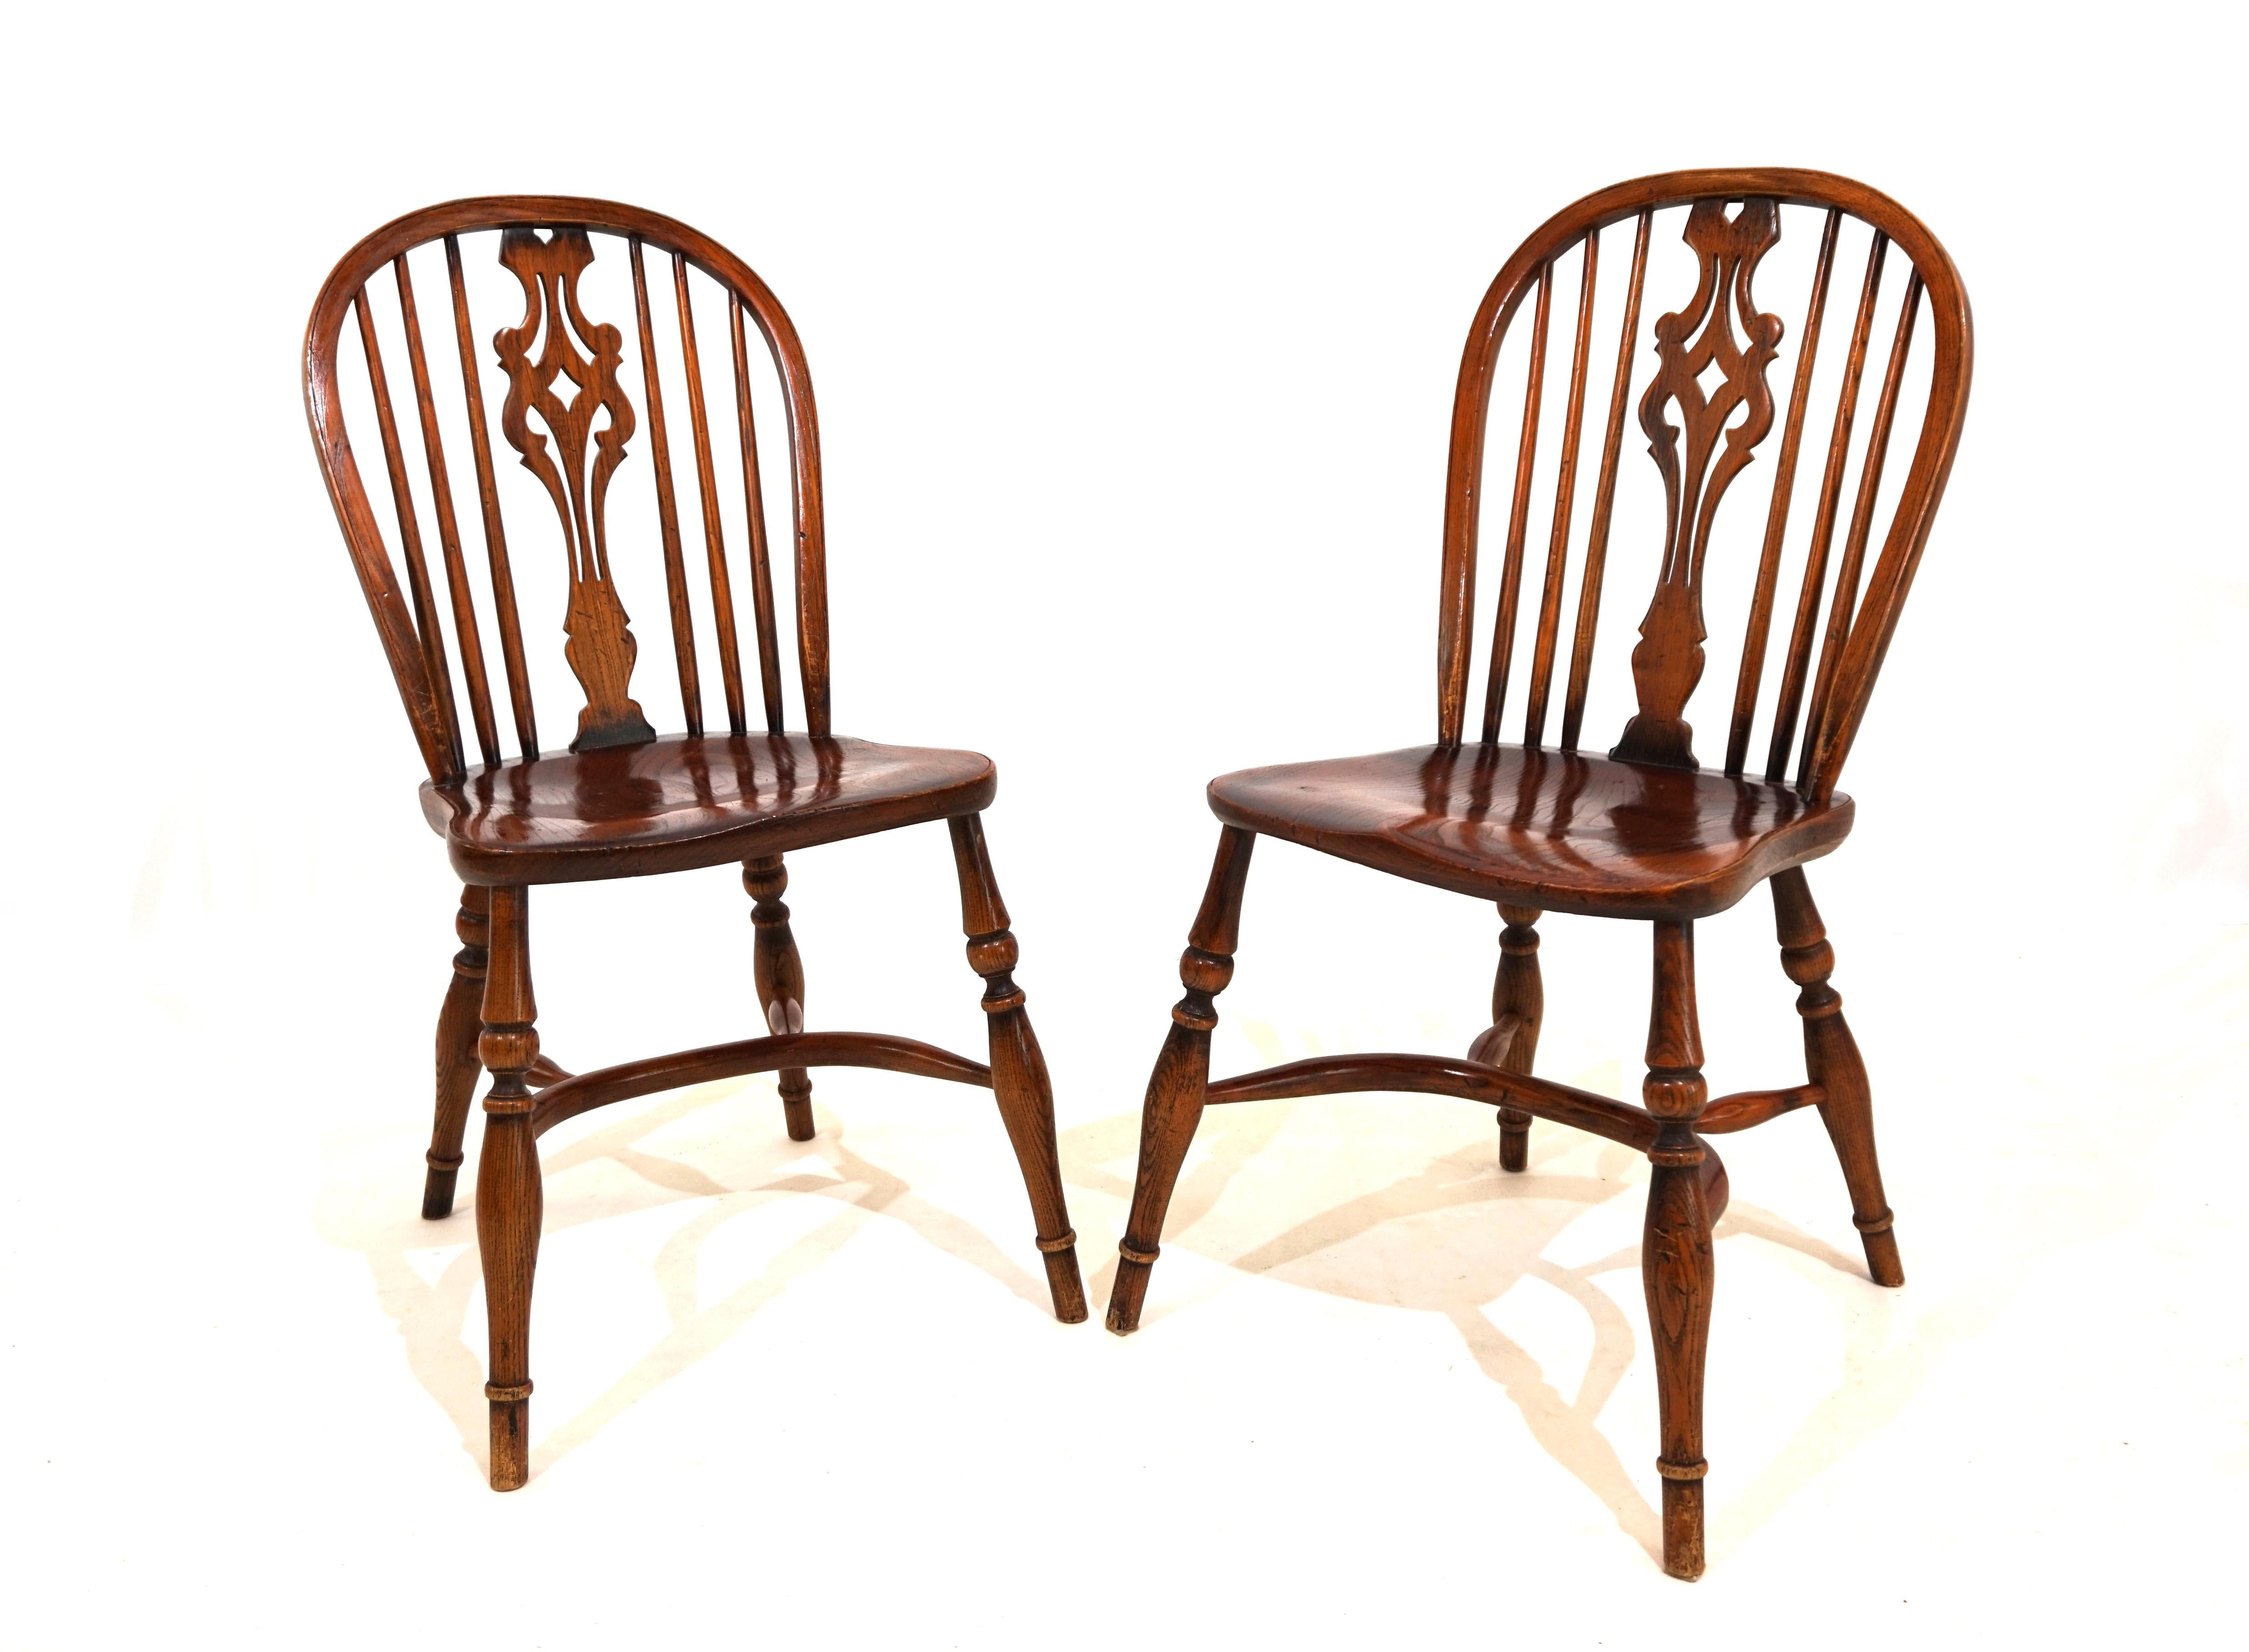 Late 19th Century Set of 2 English Windsor chairs